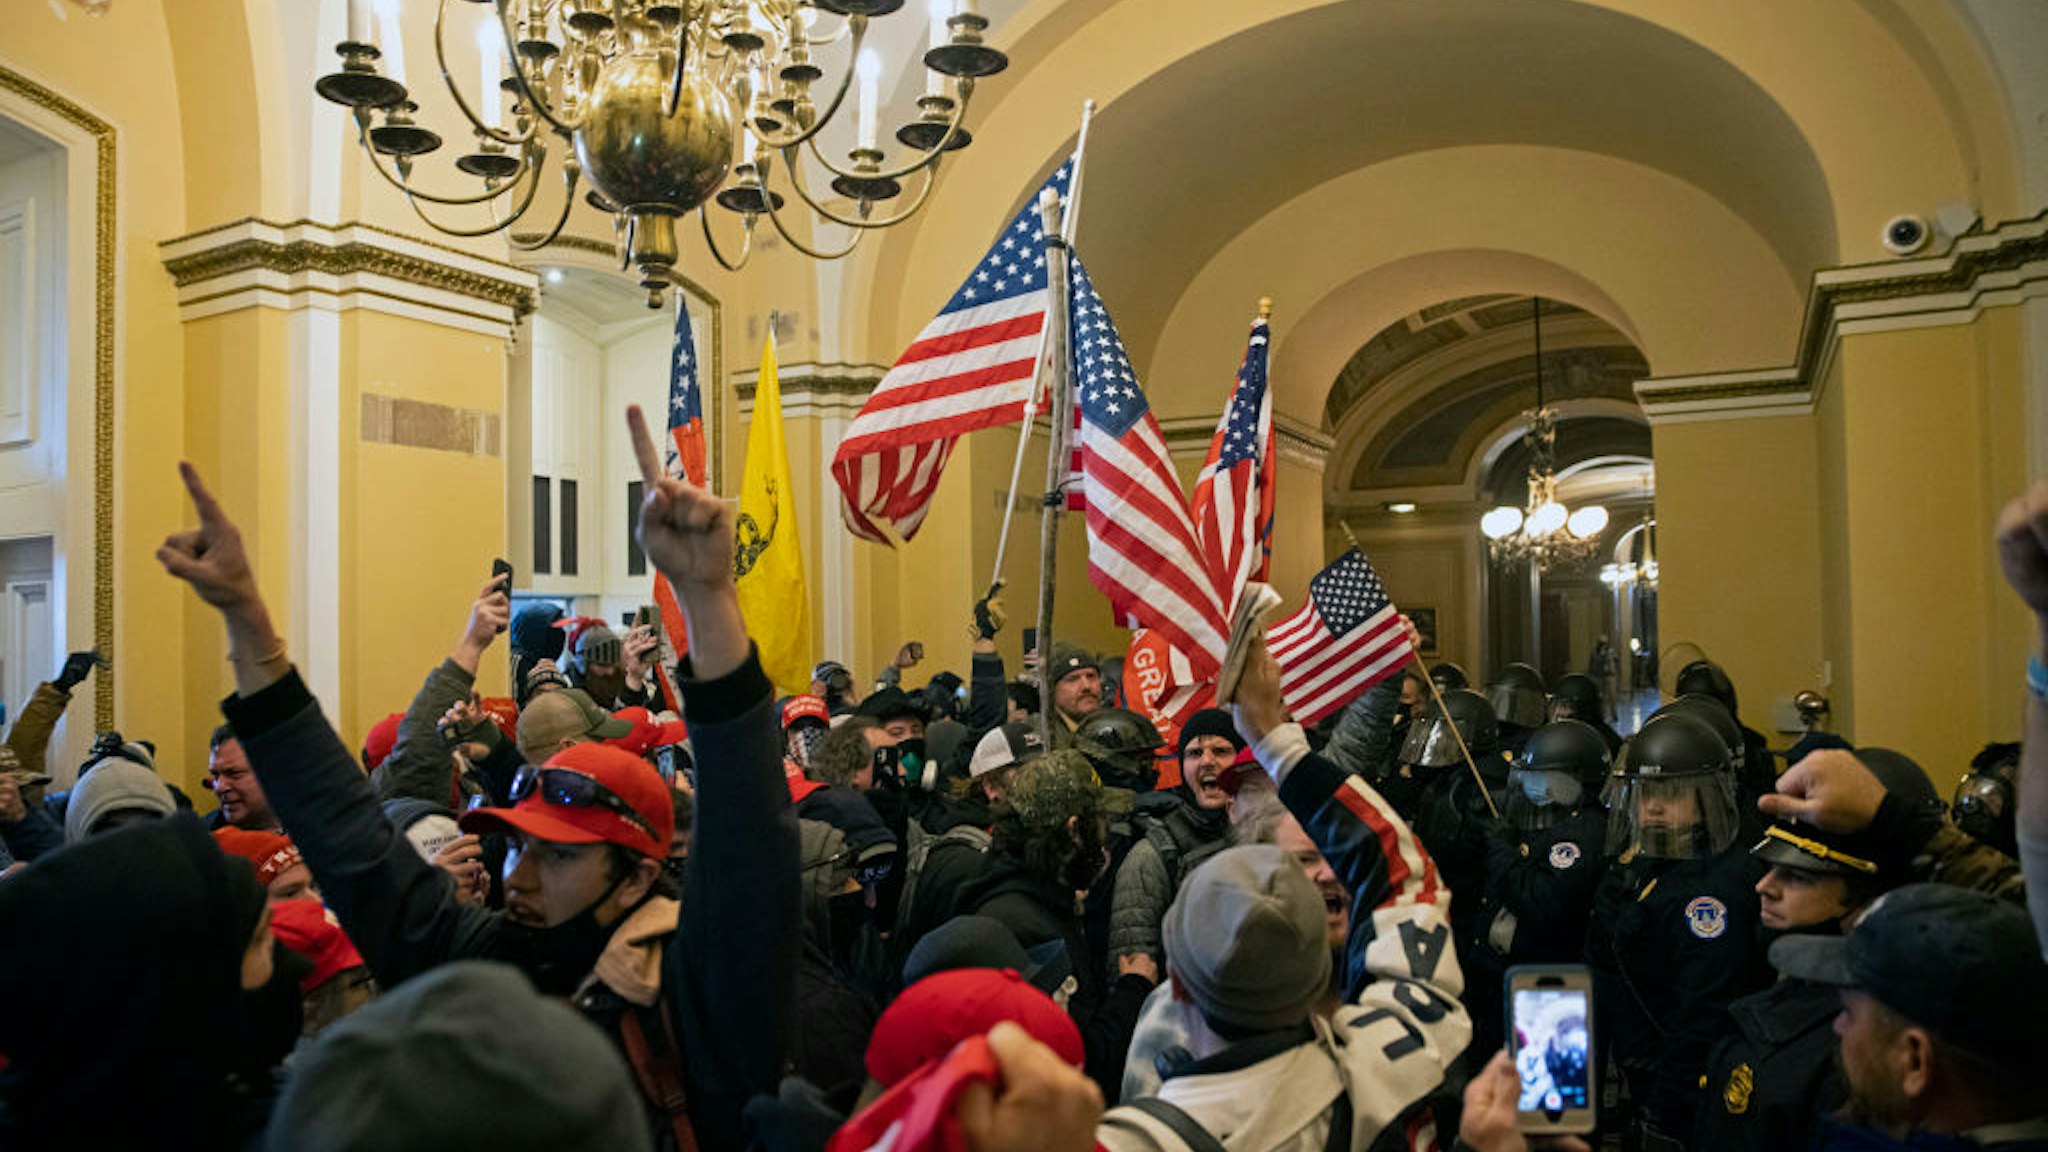 WASHINGTON, DC - JANUARY 06: Supporters of US President Donald Trump protest inside the US Capitol on January 6, 2021, in Washington, DC. Demonstrators breeched security and entered the Capitol as Congress debated the 2020 presidential election Electoral Vote Certification.